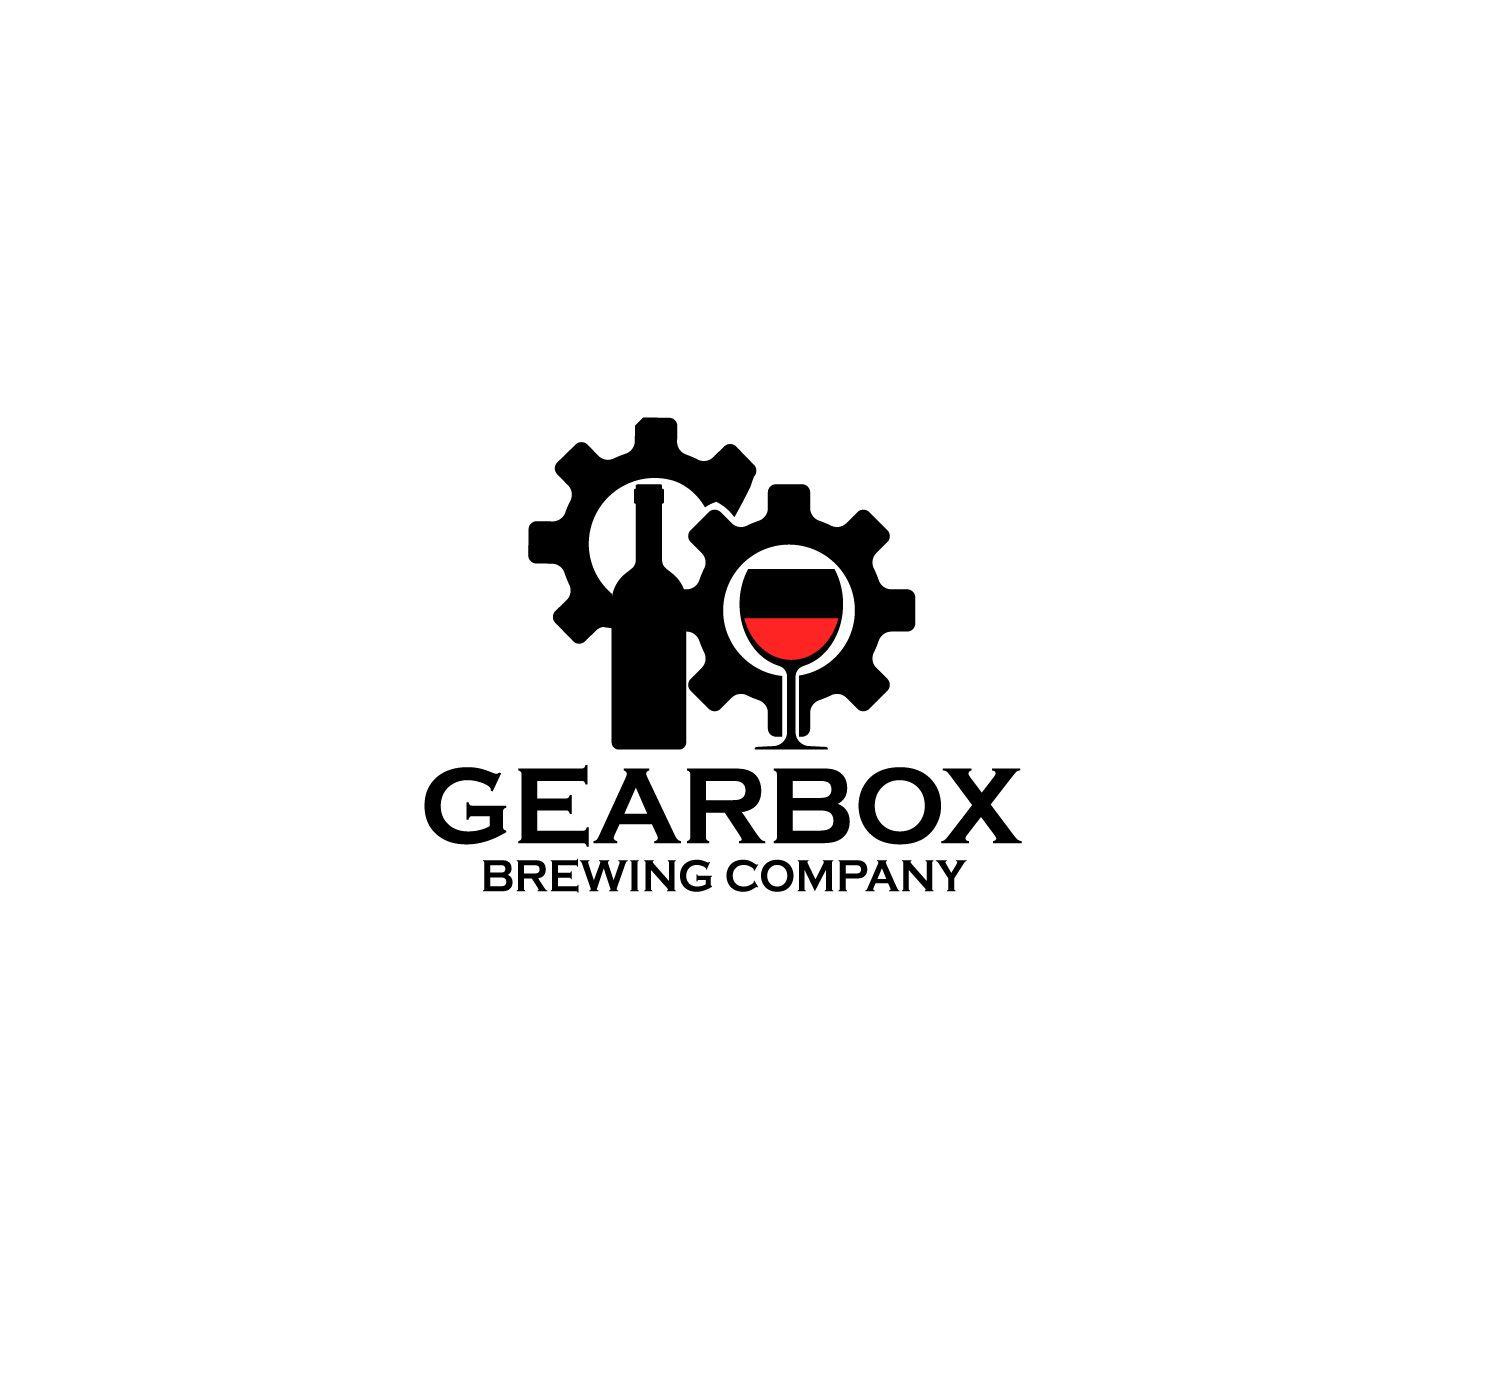 Gearbox Logo - Traditional, Elegant, Craft Brewery Logo Design for GEARBOX BREWING